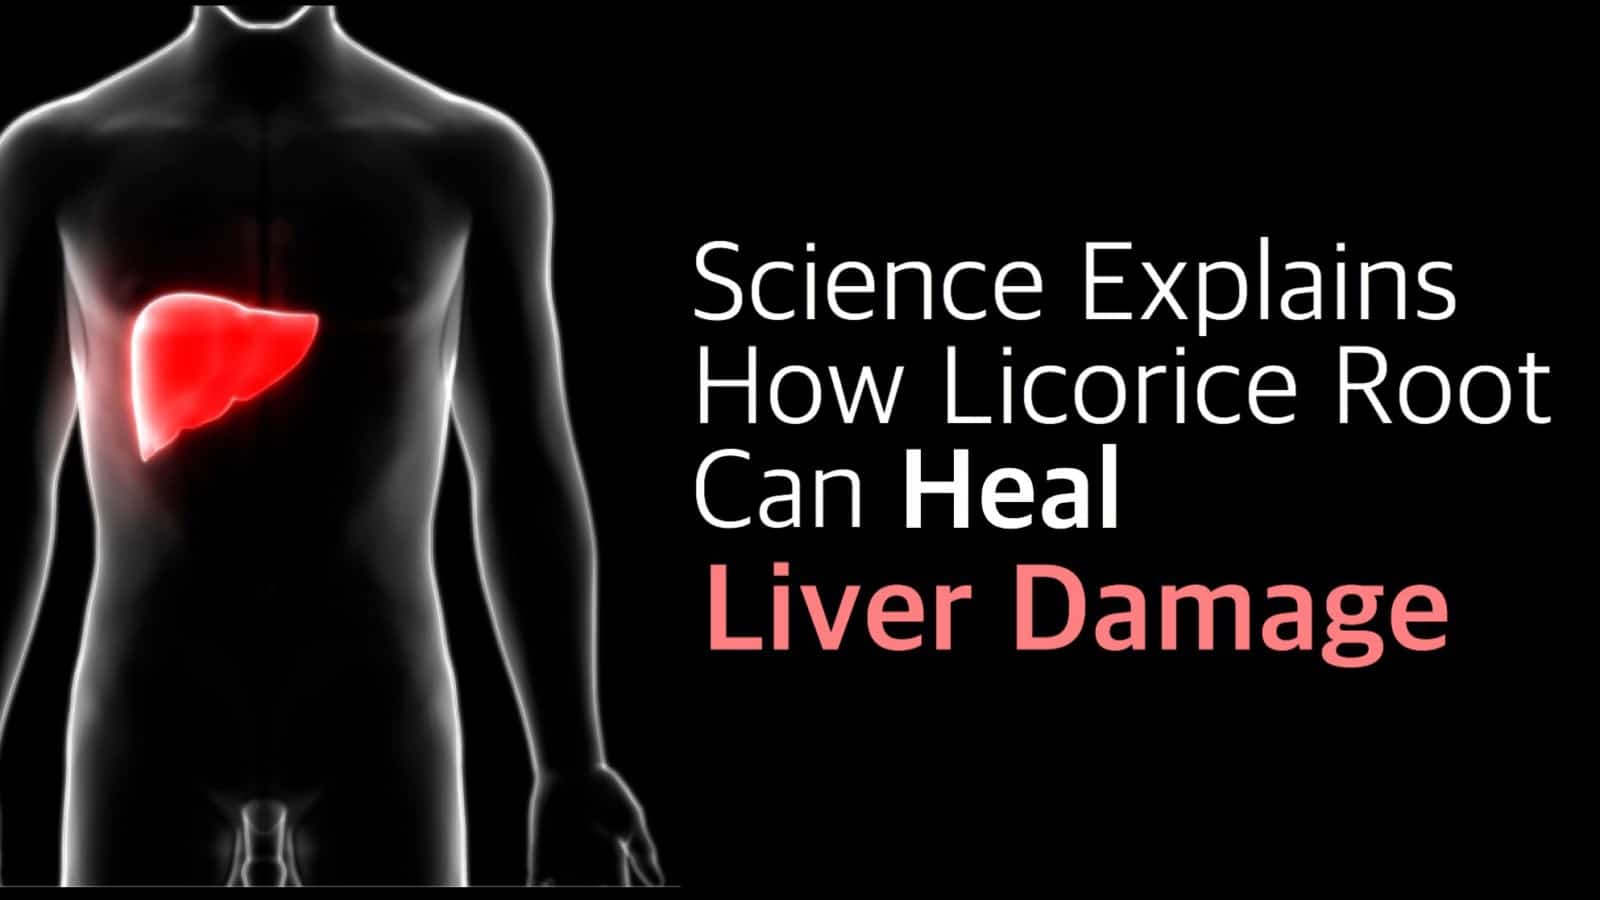 Science Explains How Licorice Root Can Heal Liver Damage